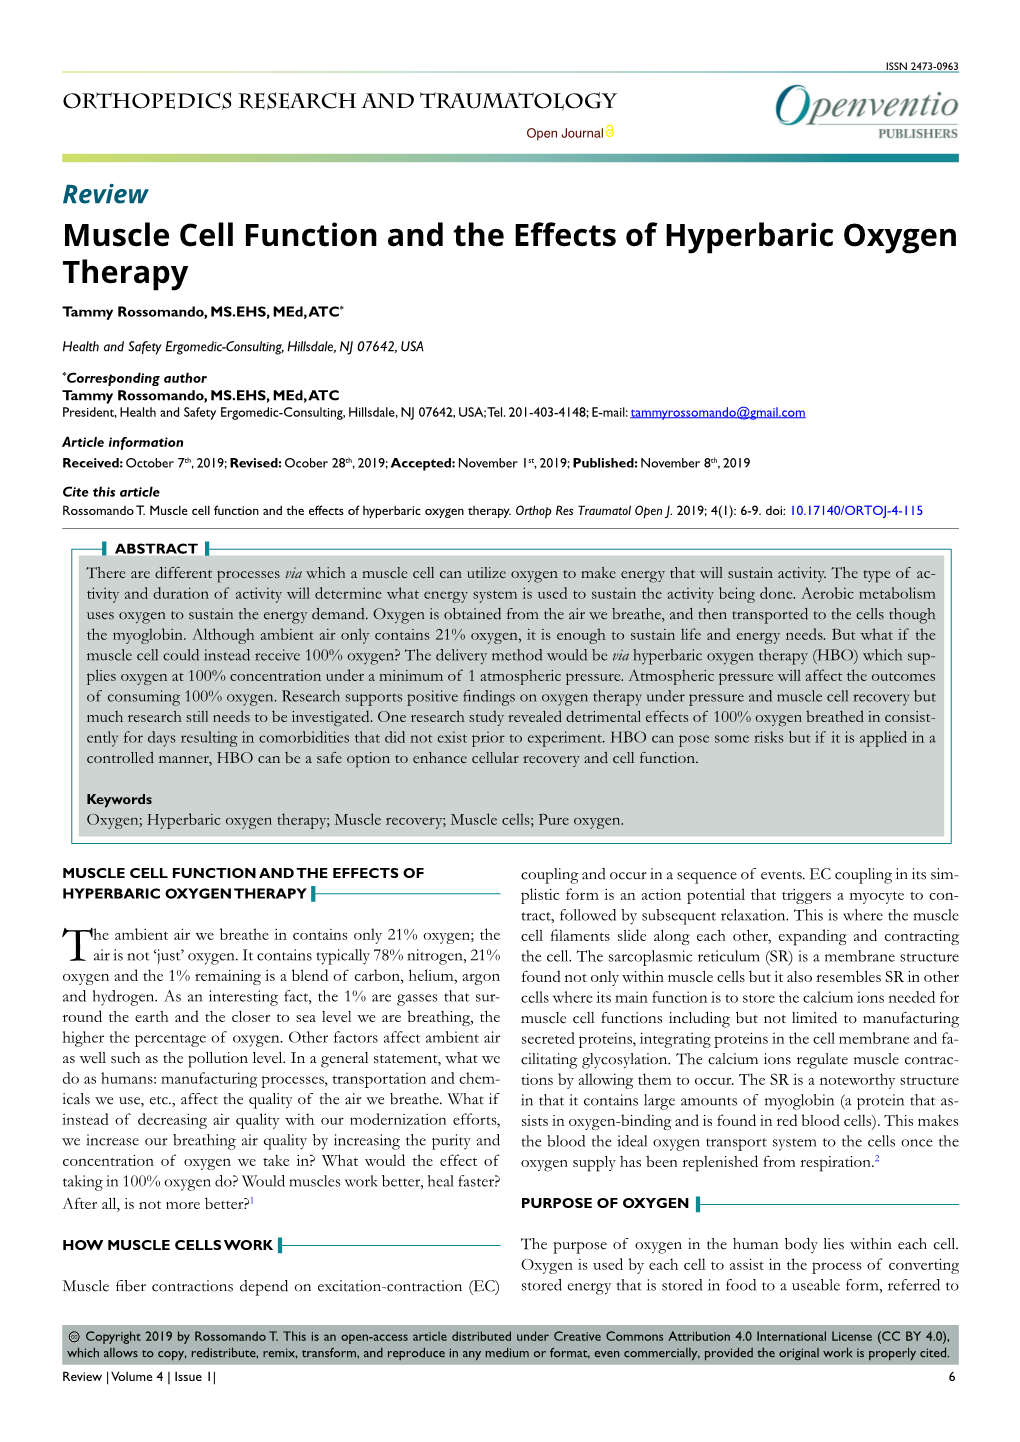 Muscle Cell Function and the Effects of Hyperbaric Oxygen Therapy